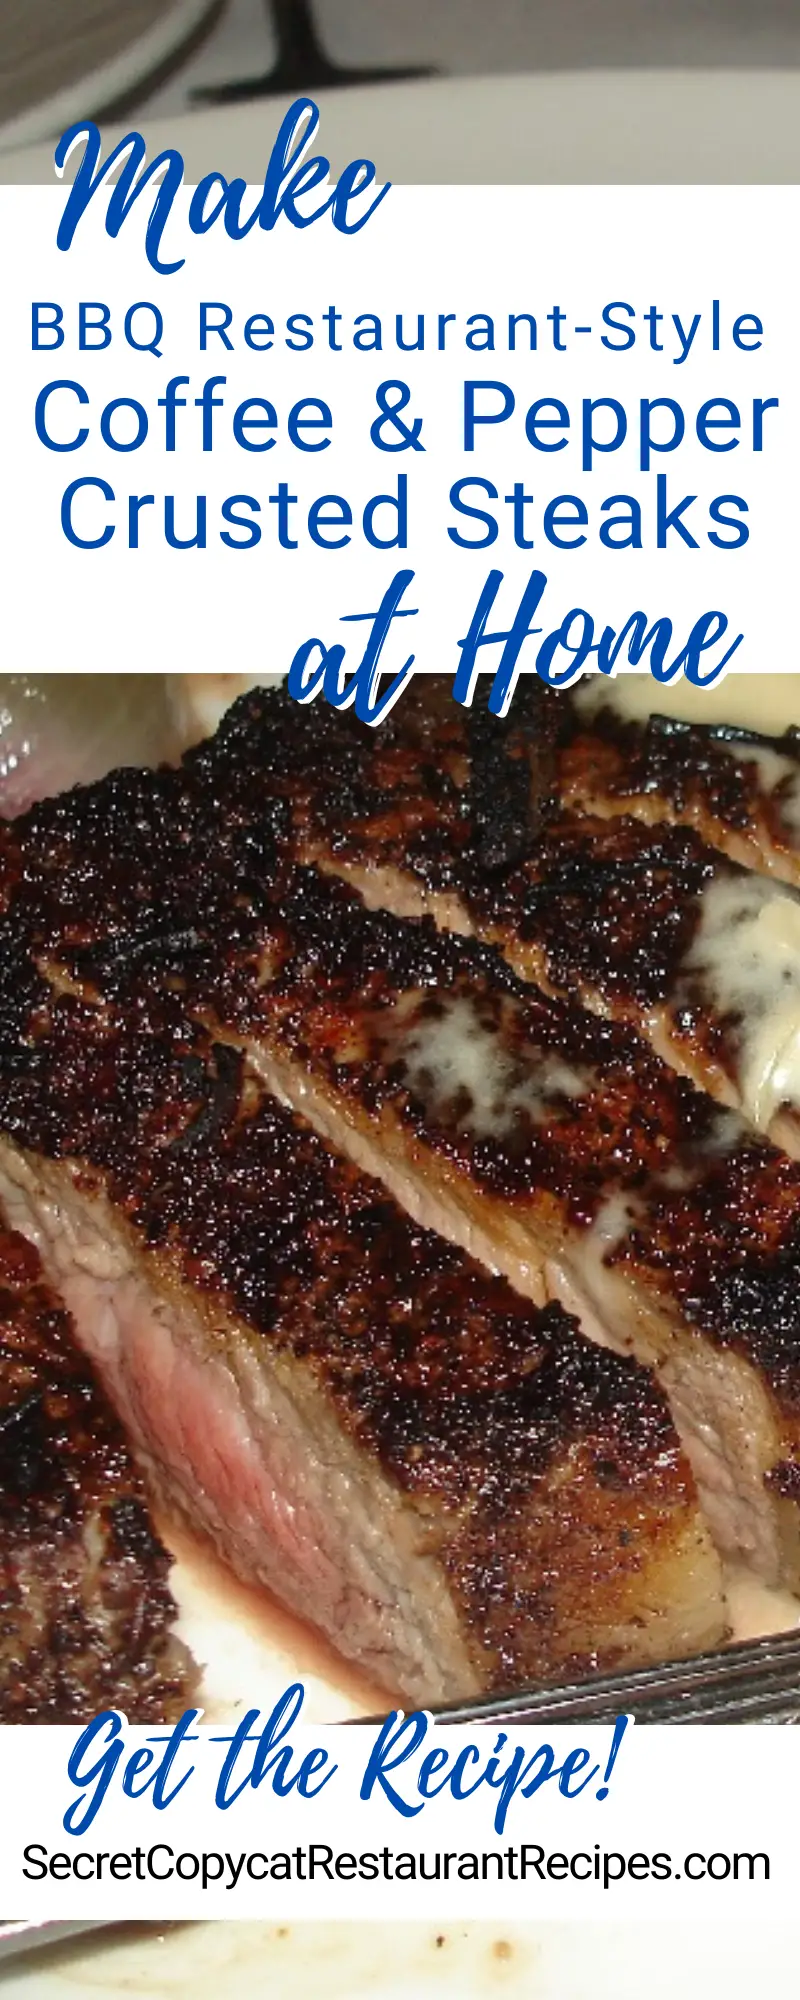 BBQ Restaurant-Style Coffee and Pepper Crusted Steaks Recipe